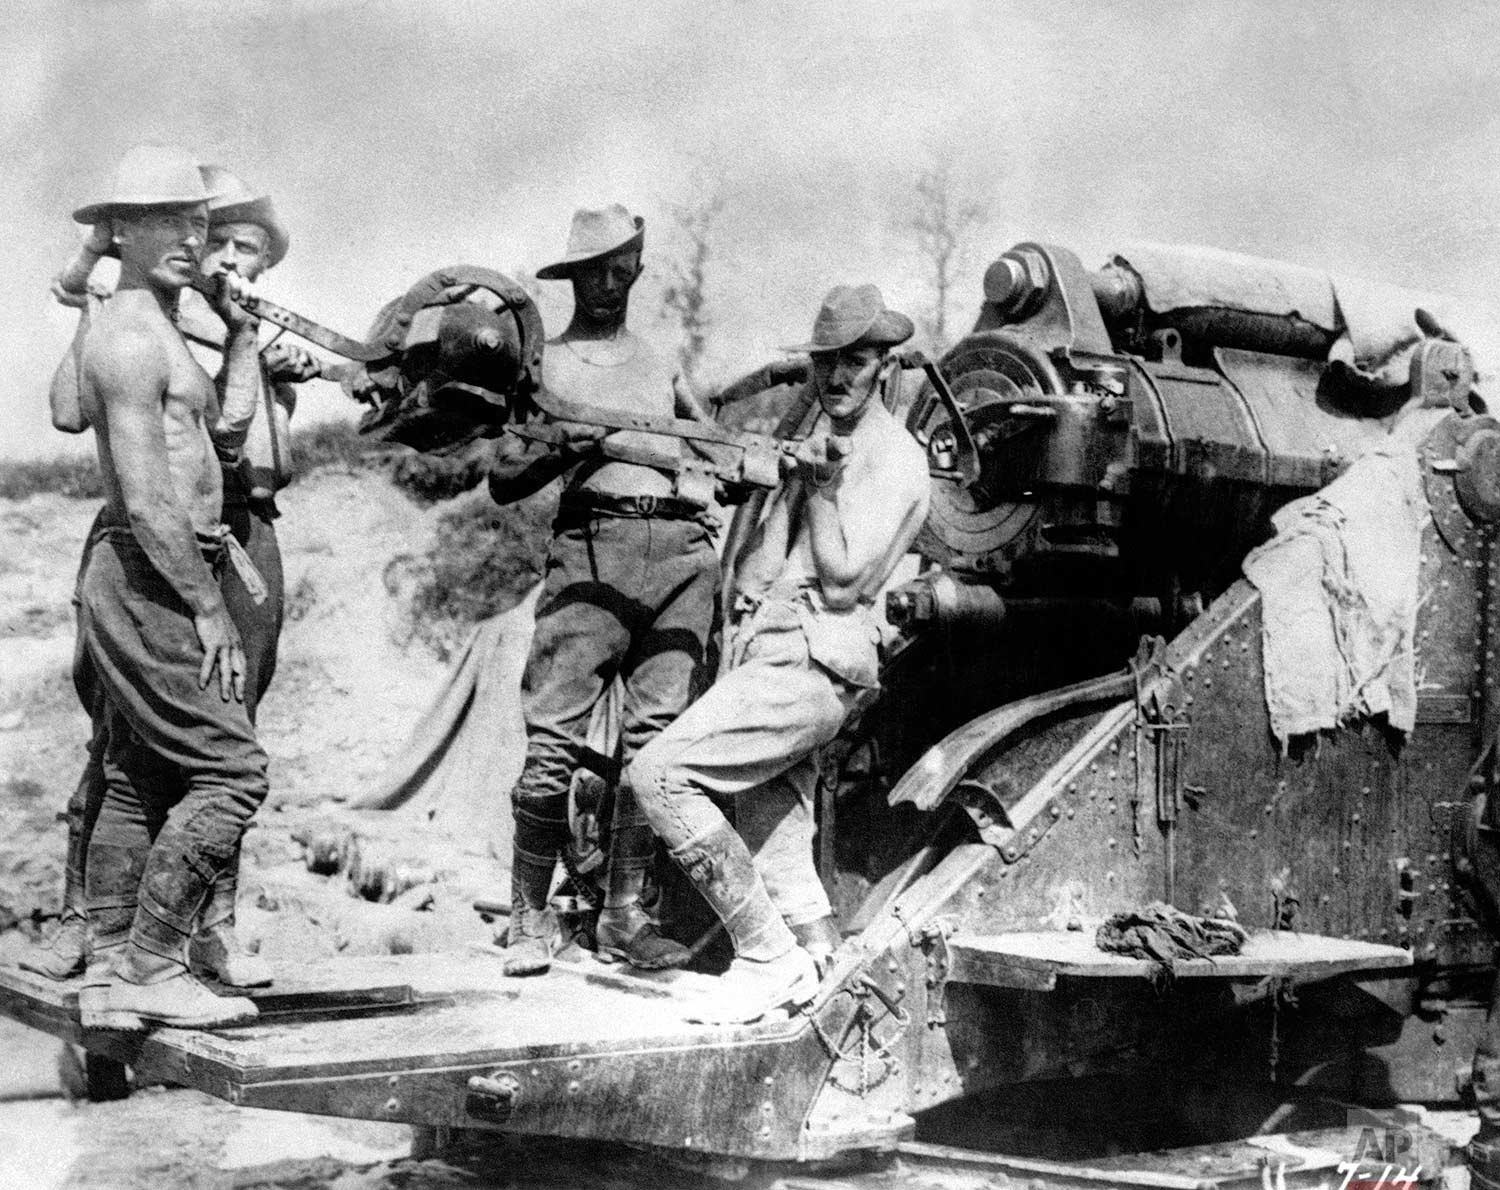  In this 1916 photo, Australian artillery soldiers operate a large caliber gun at the Somme front, in France during World War One. (AP Photo) 